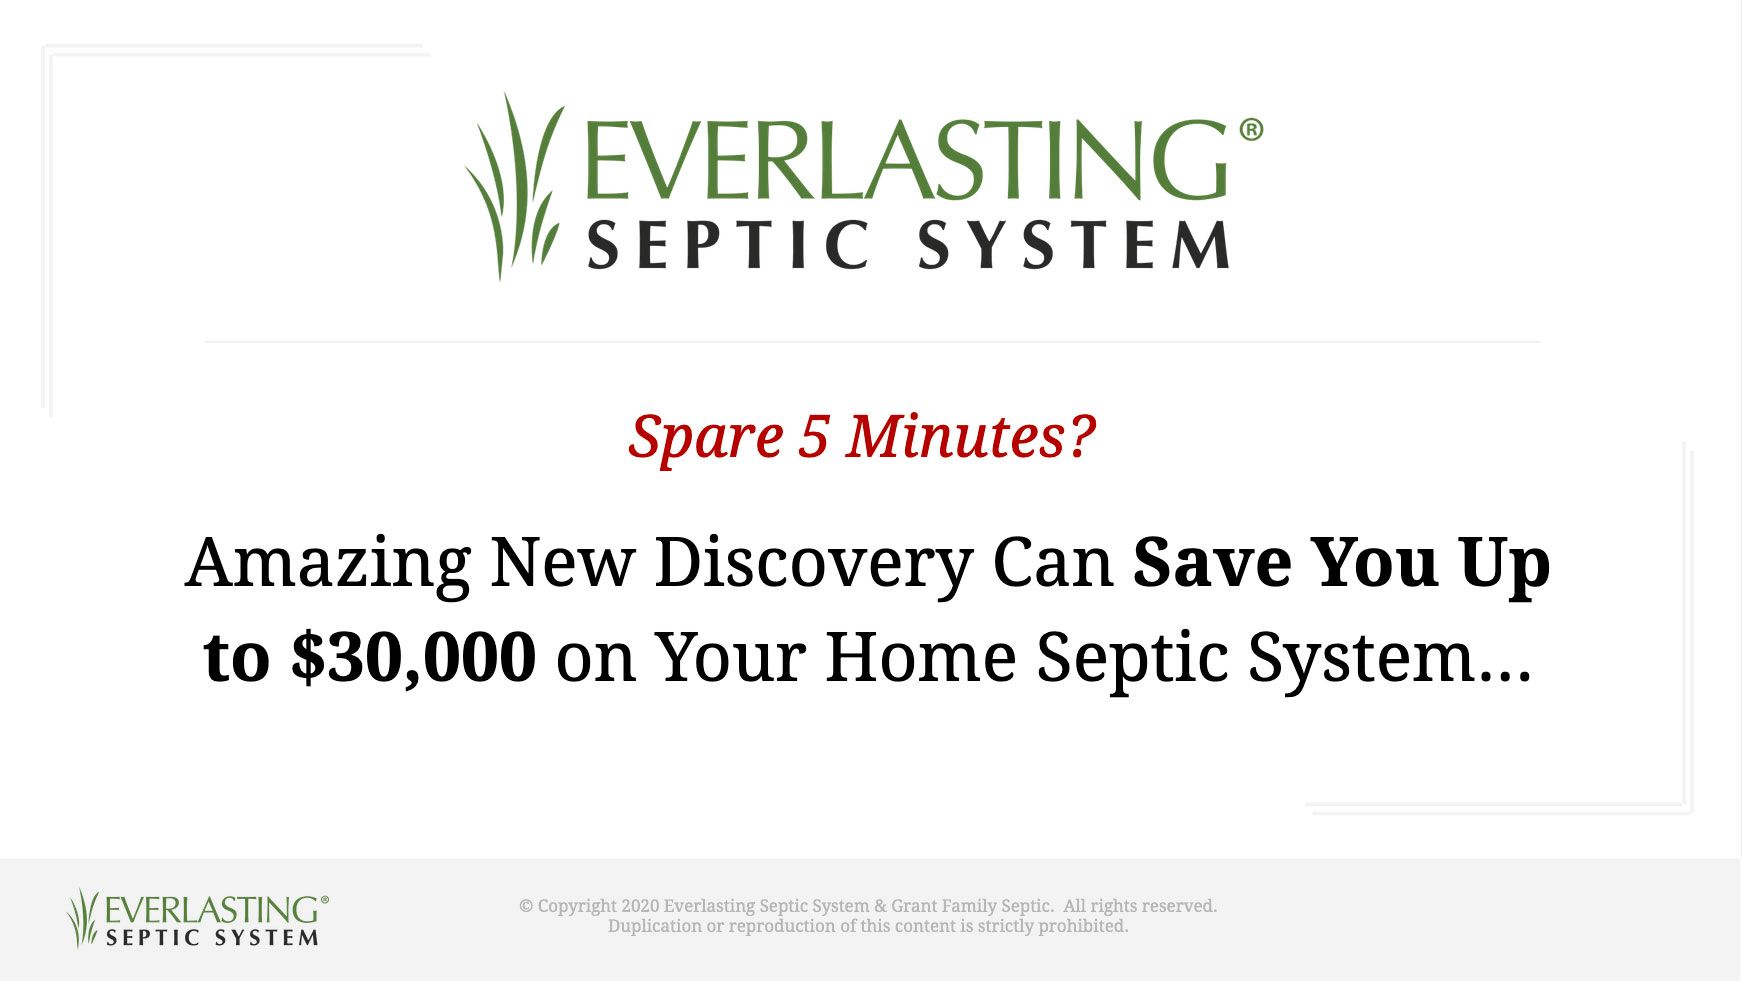 Everlasting Septic System eliminates Septic System Replacement